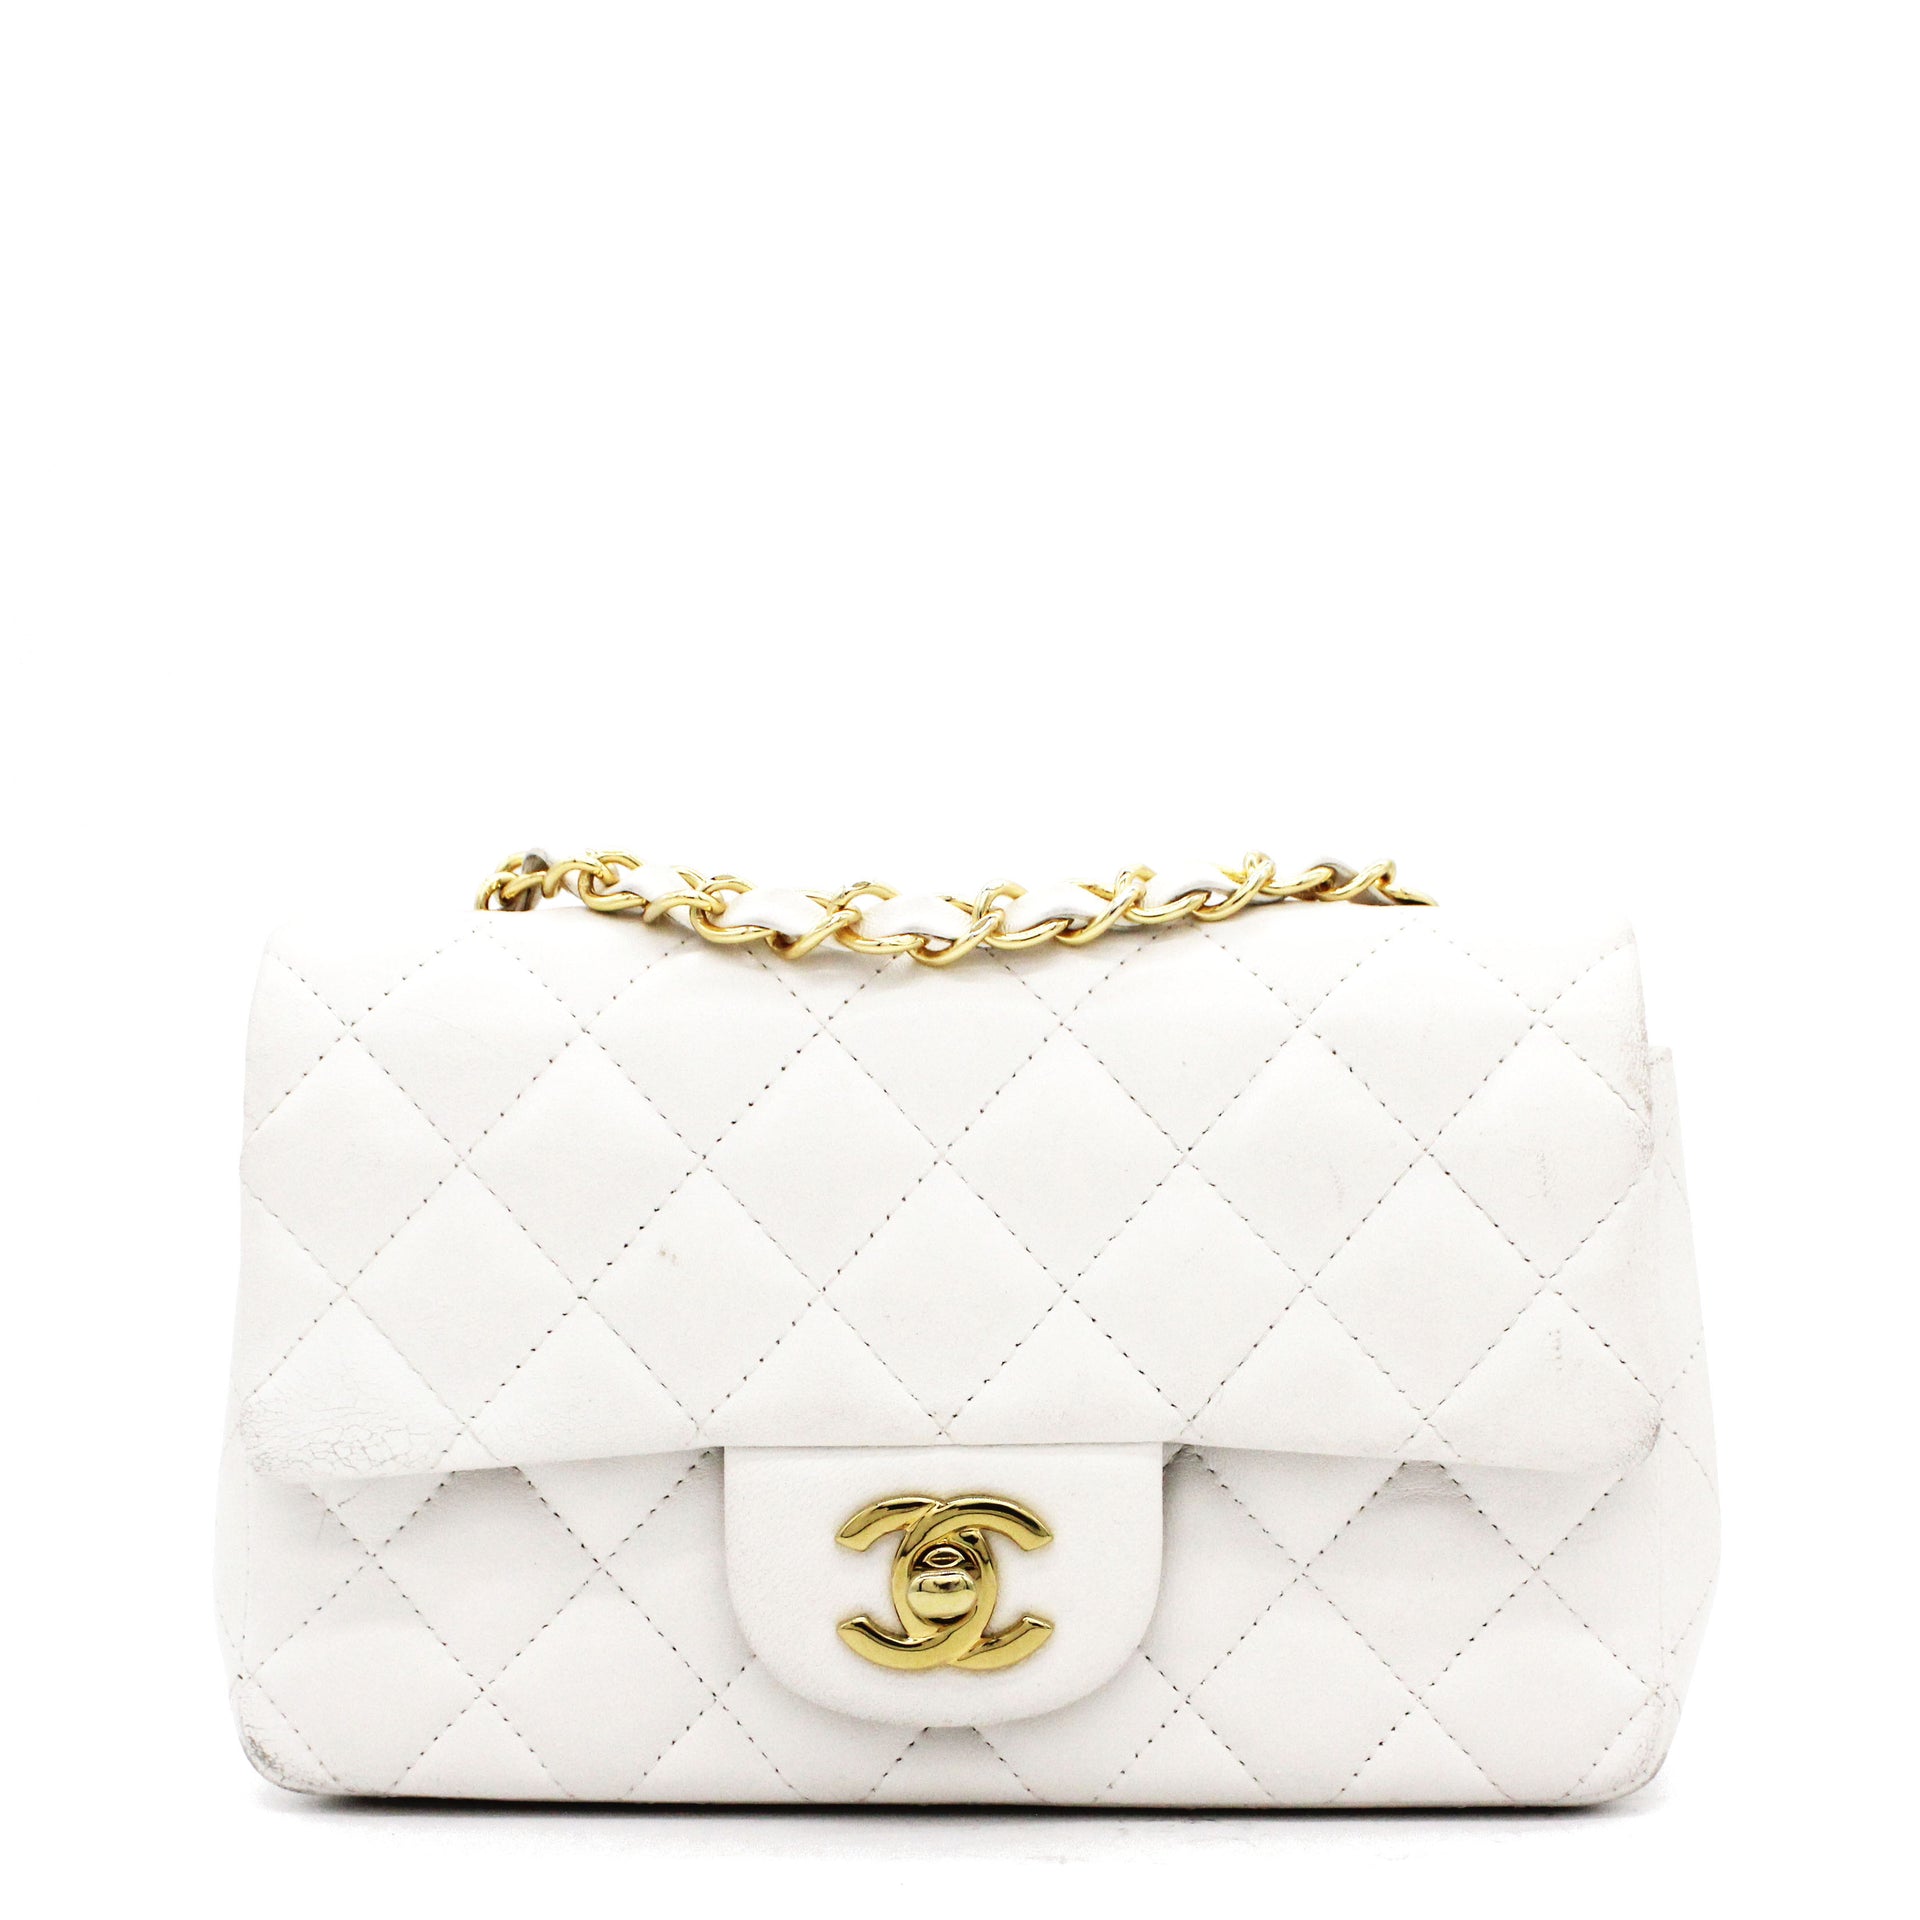 Chanel  Classic Flap Bag Jumbo  Offwhite Caviar Leather  PreLoved   Bagista